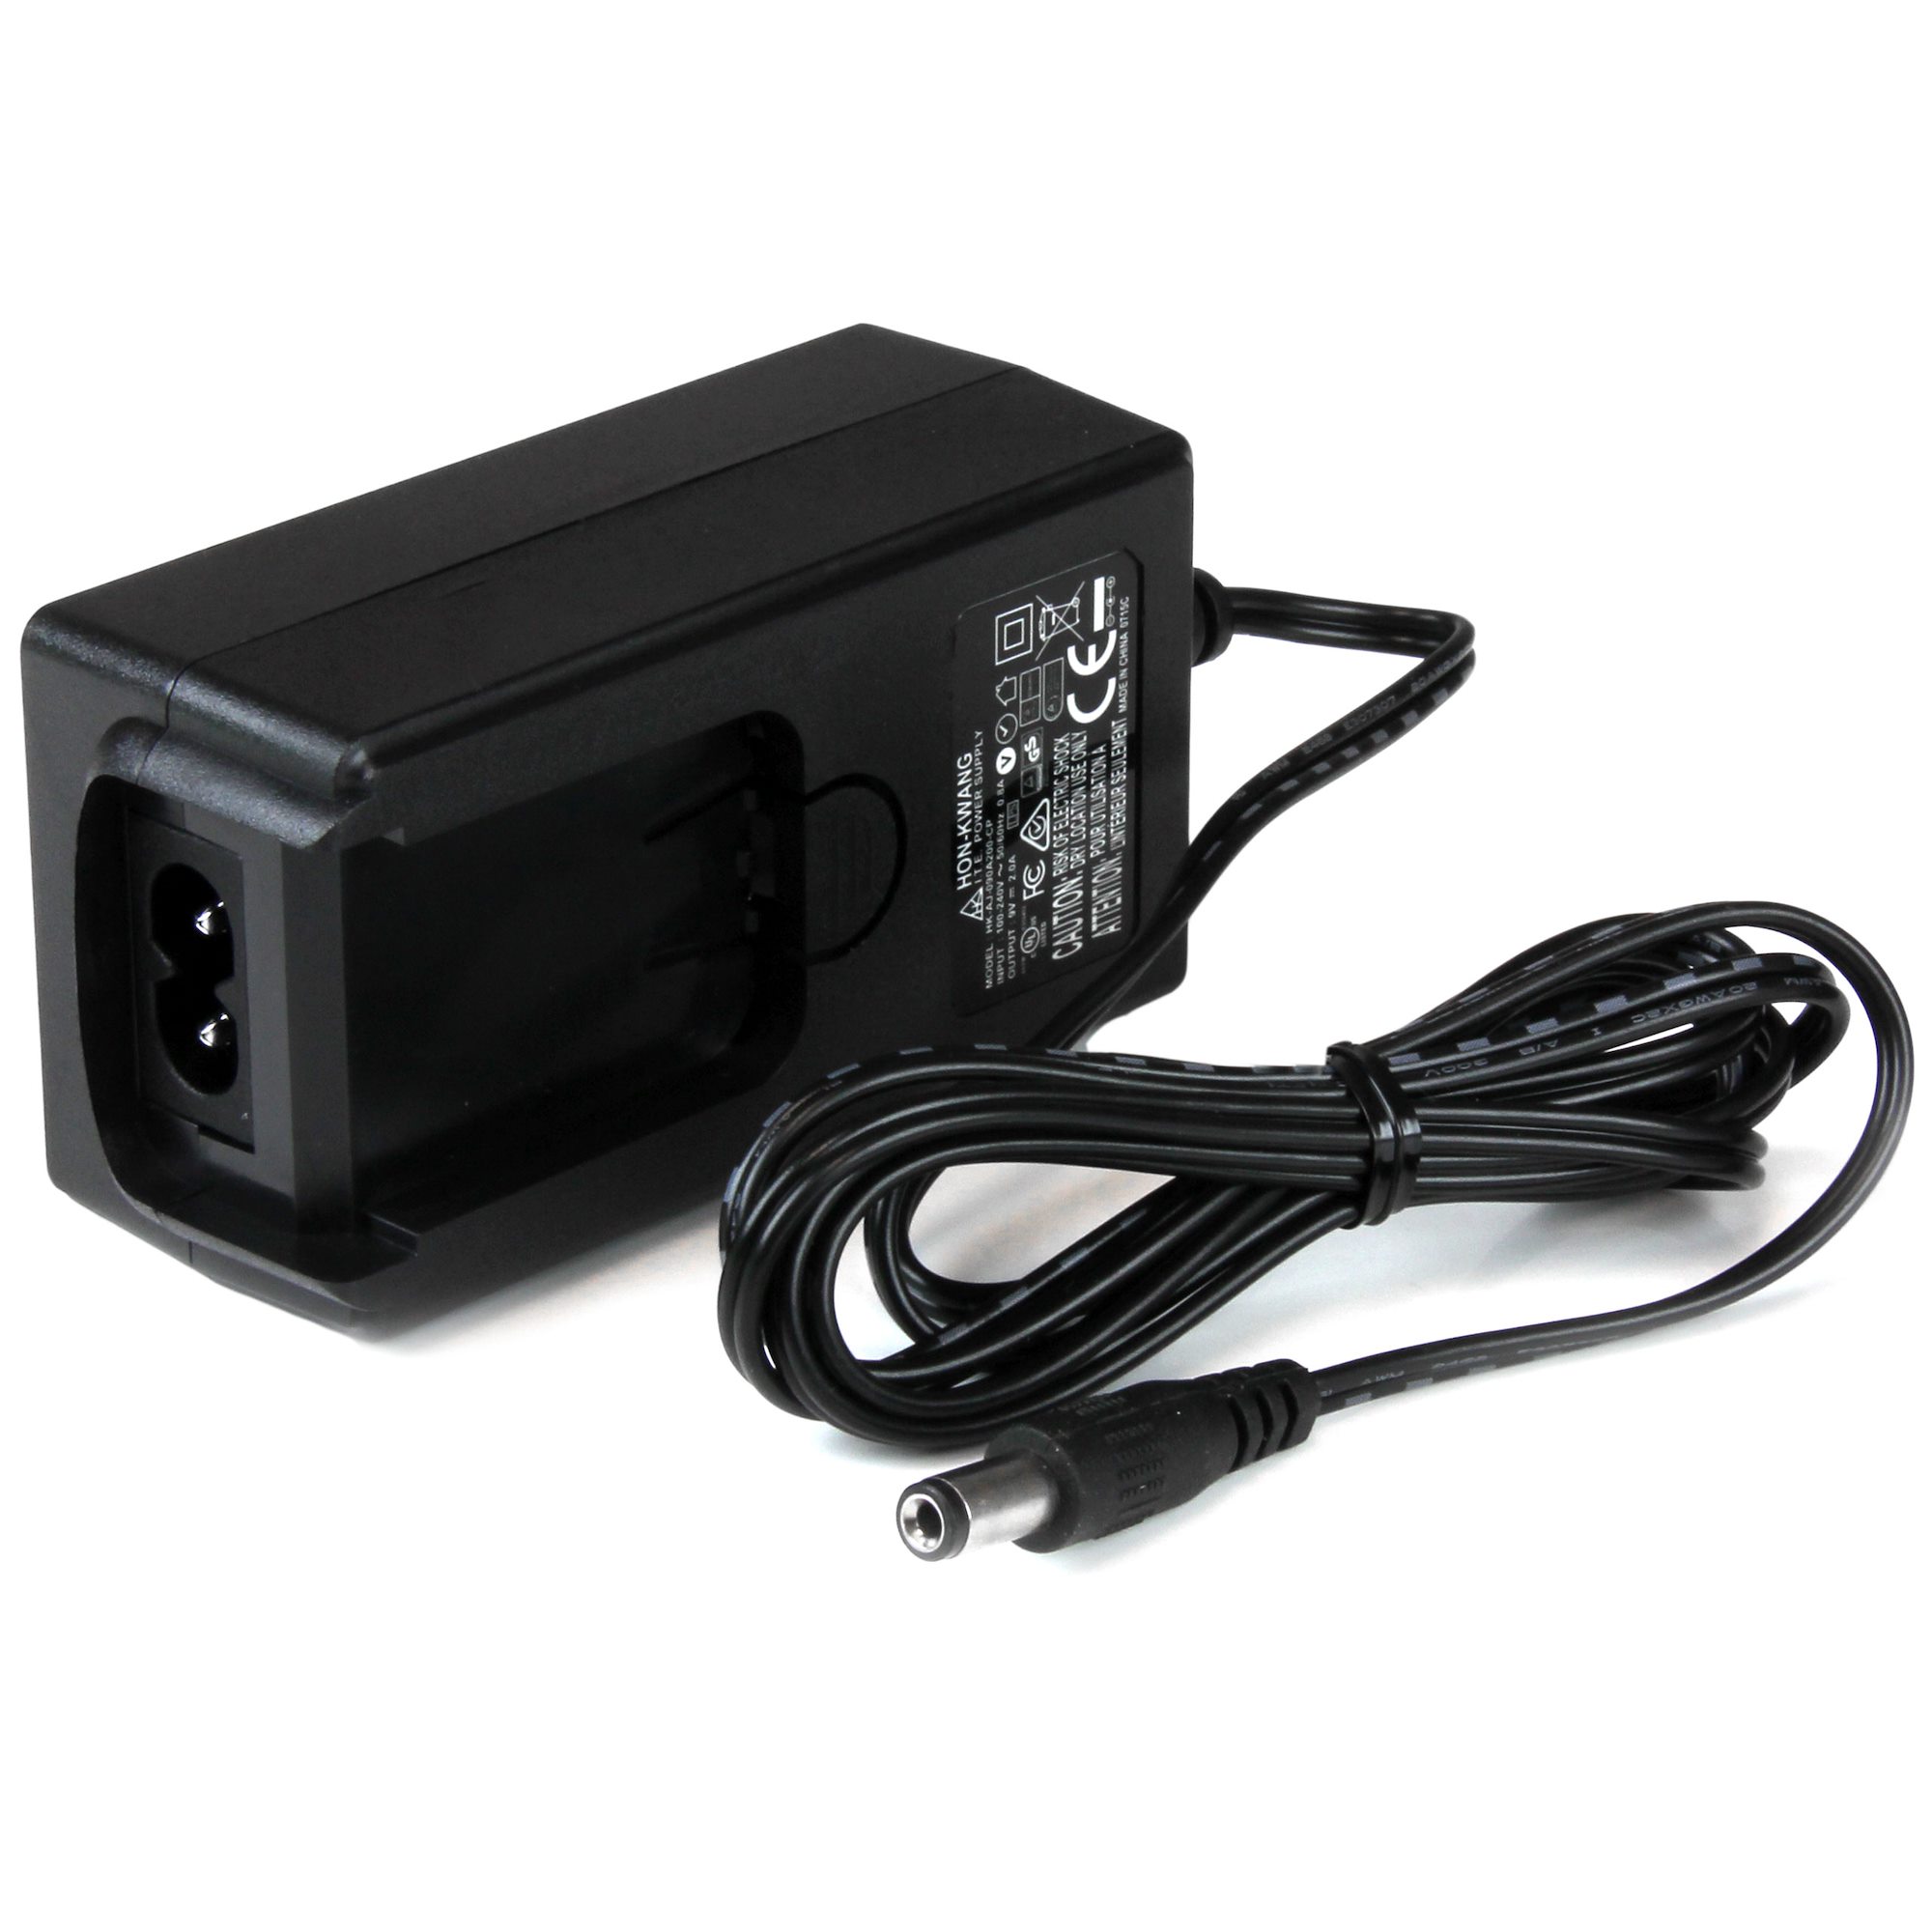 UK 9V 2A Mains AC-DC Adaptor Power Supply Charger for BT